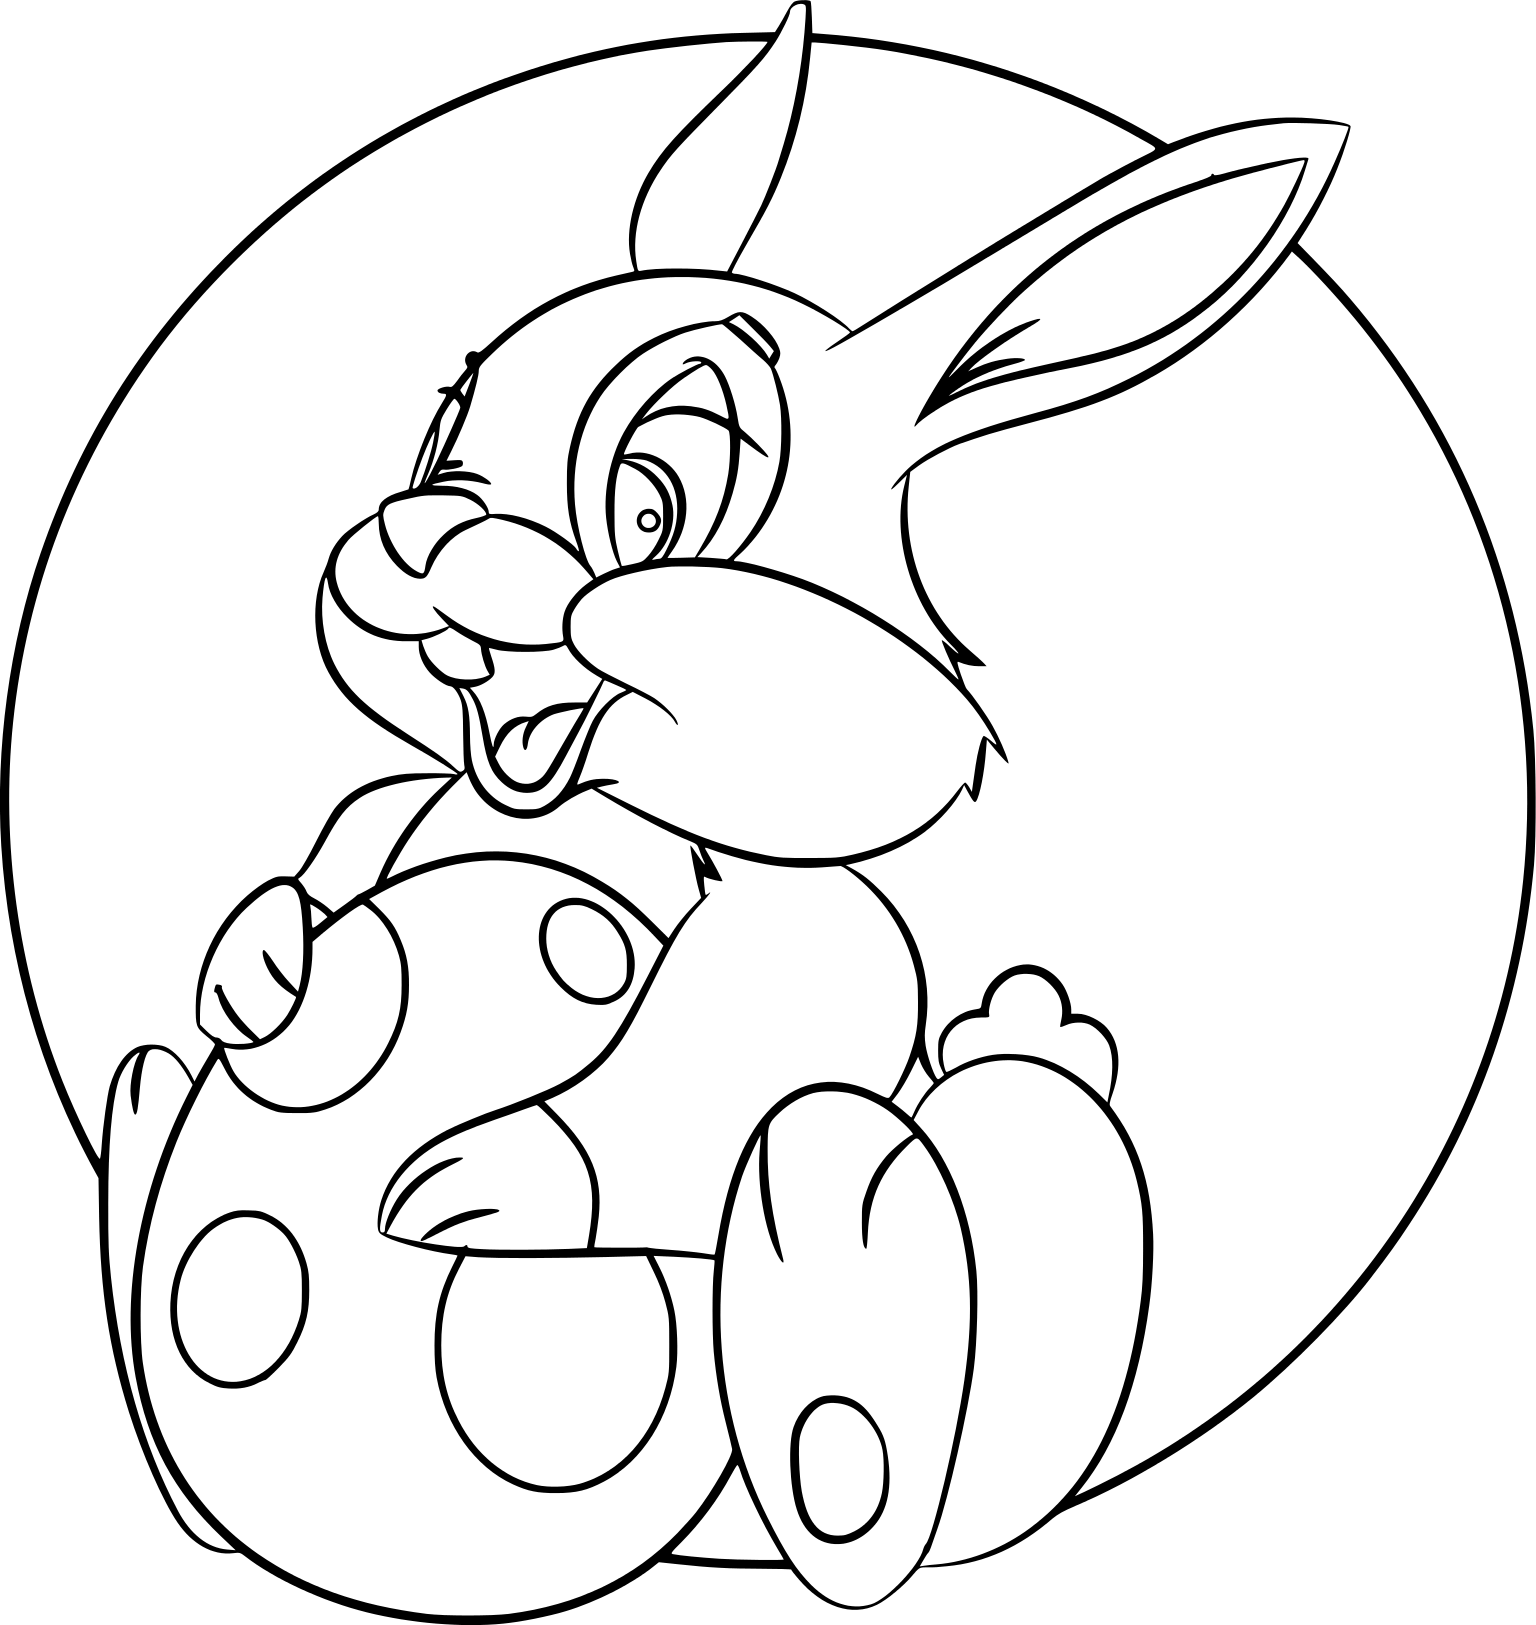 Easter Bunny Holding An Egg Coloring Page